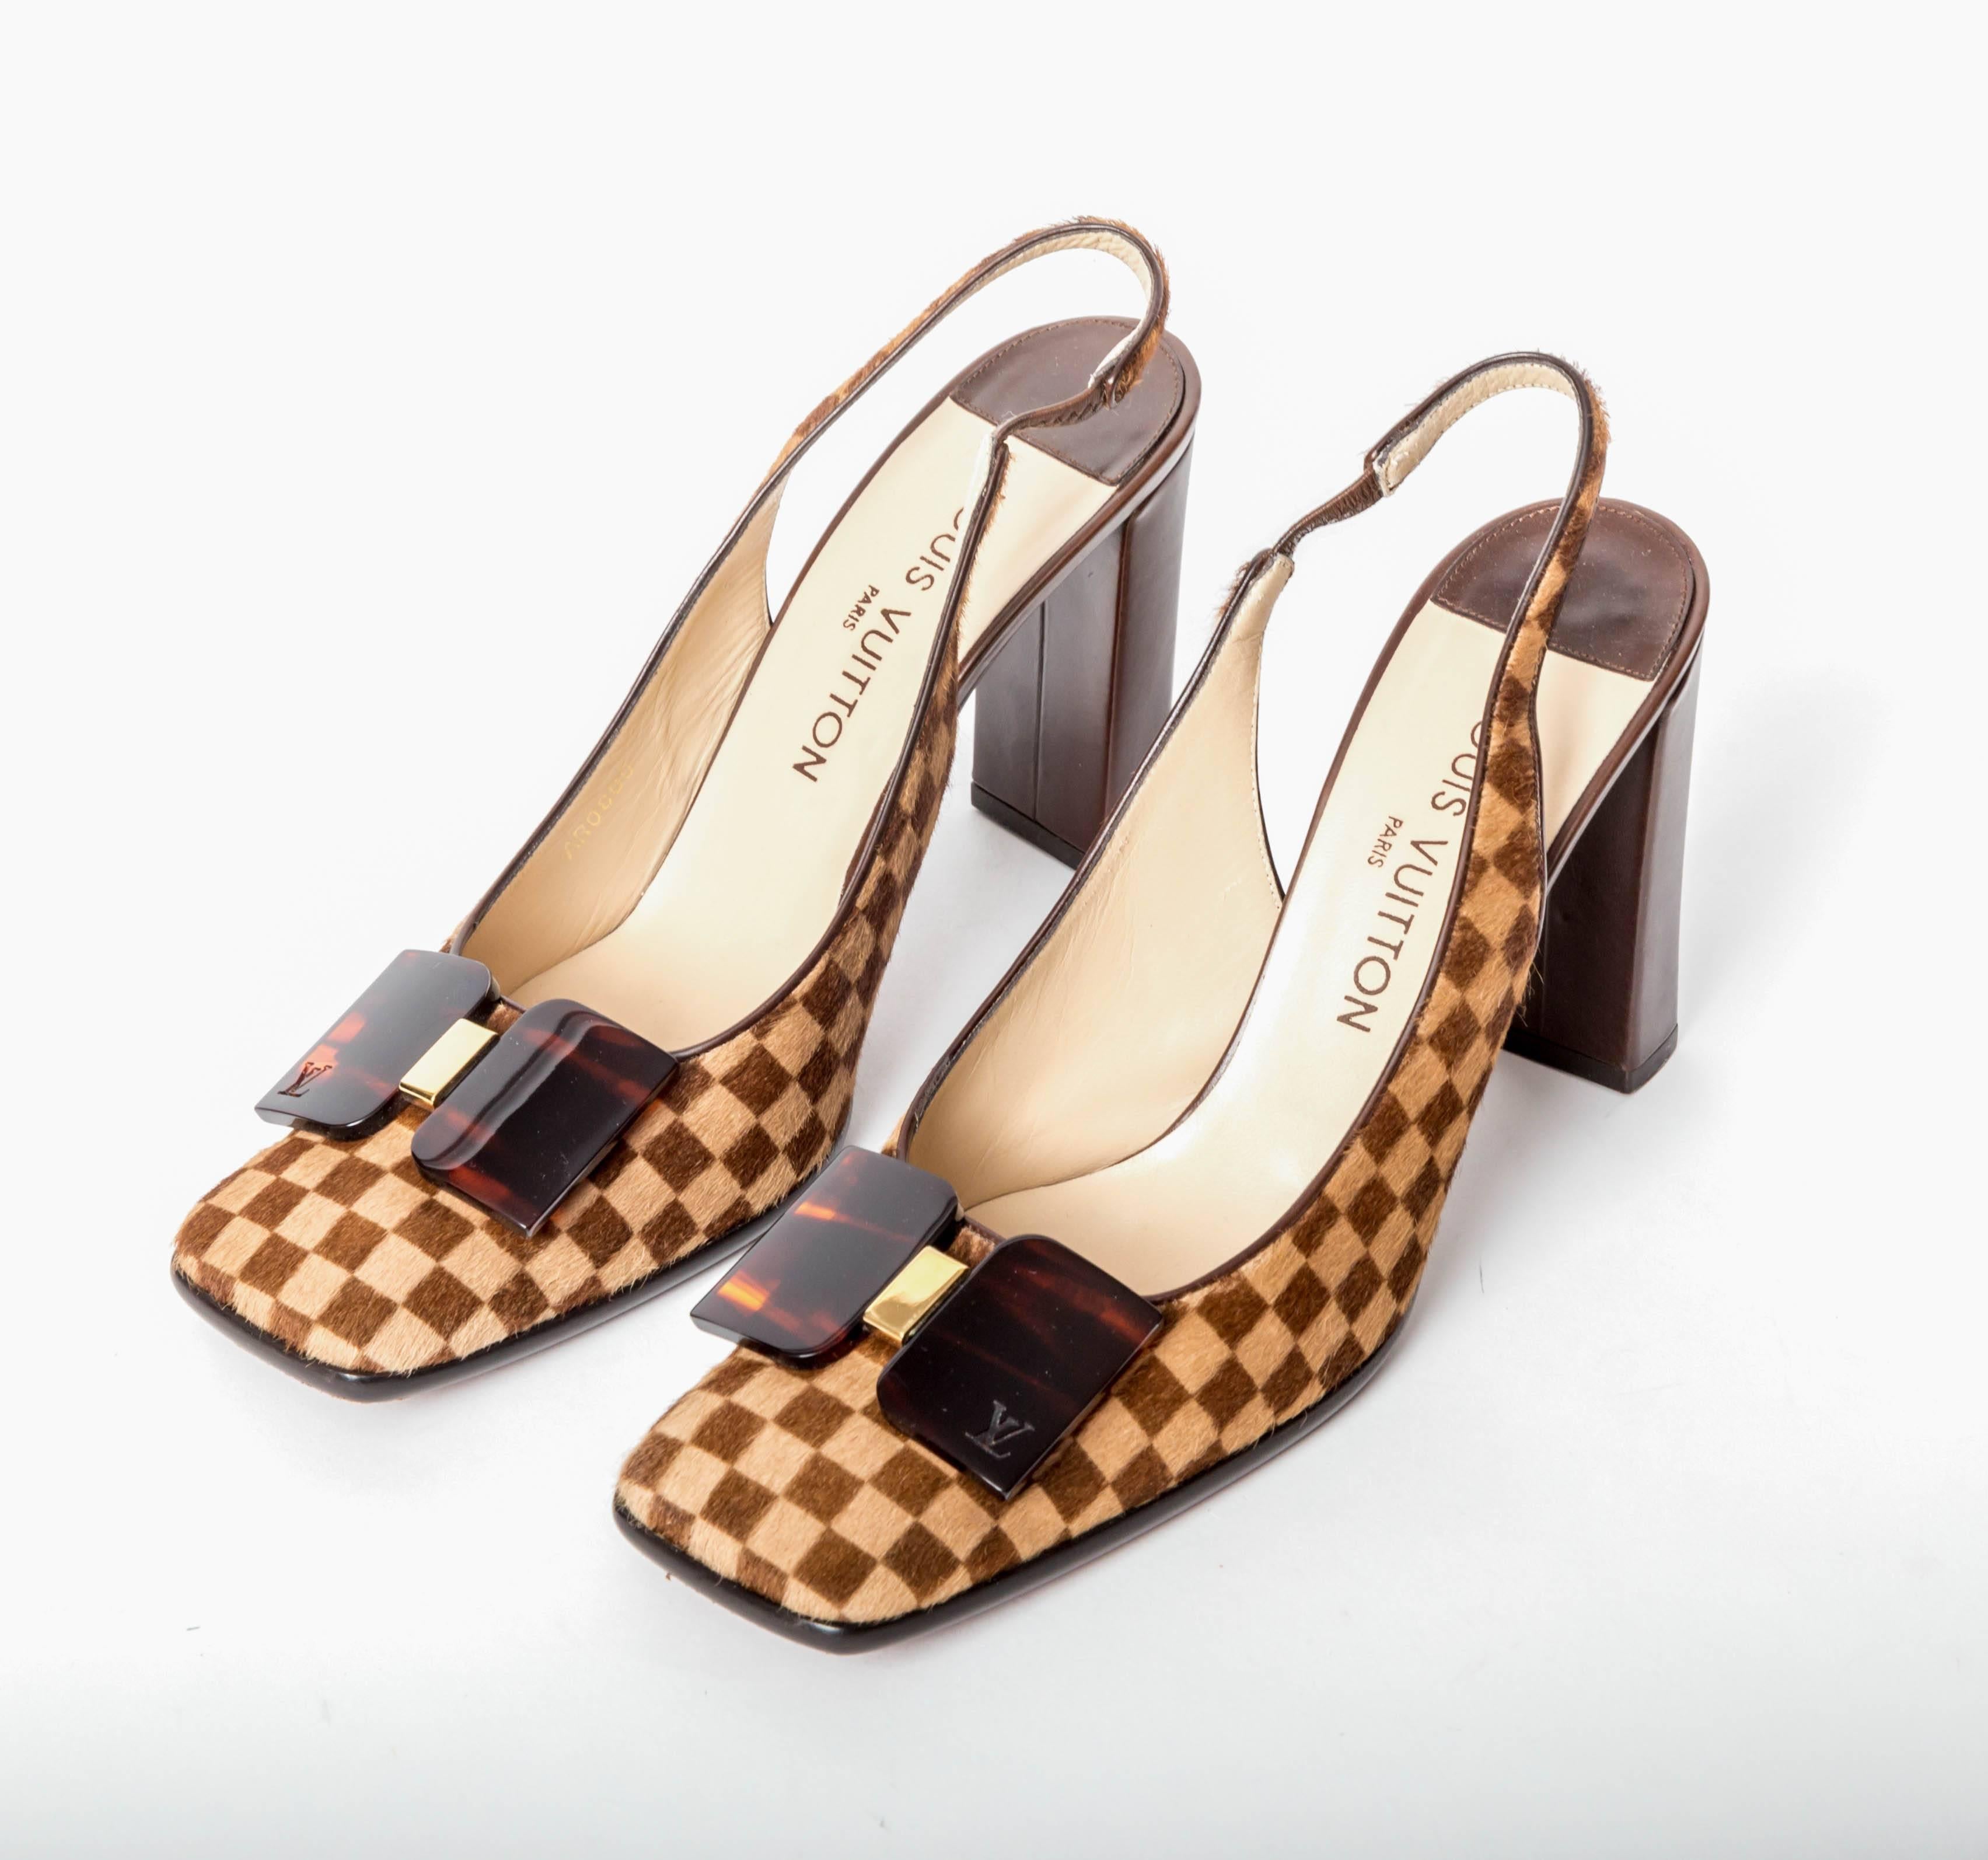 Vintage Louis Vuitton Damier Pony Skin Slingbacks - 39.5
Worn just once, these shoes are in excellent condition.
Louis Vuitton Box is included.
Tortoise shell bow detail to front of shoe.

